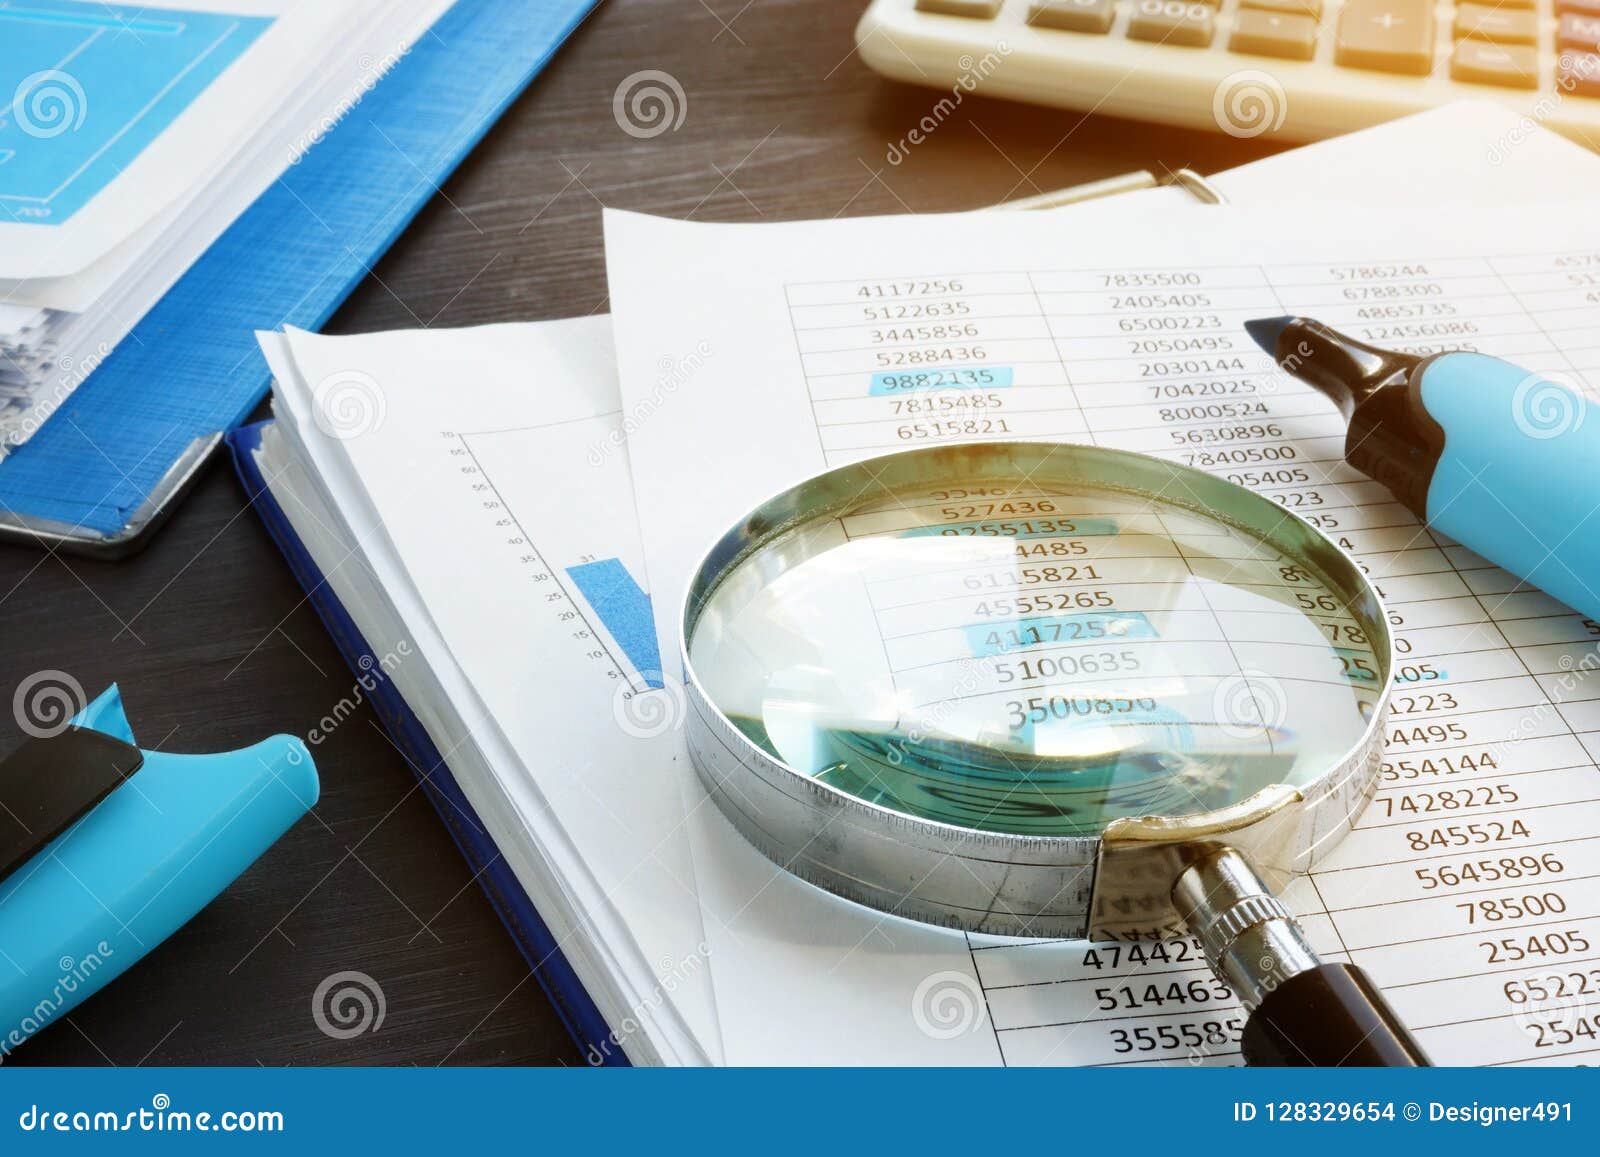 bookkeeping and audit. magnifying glass and business documents.